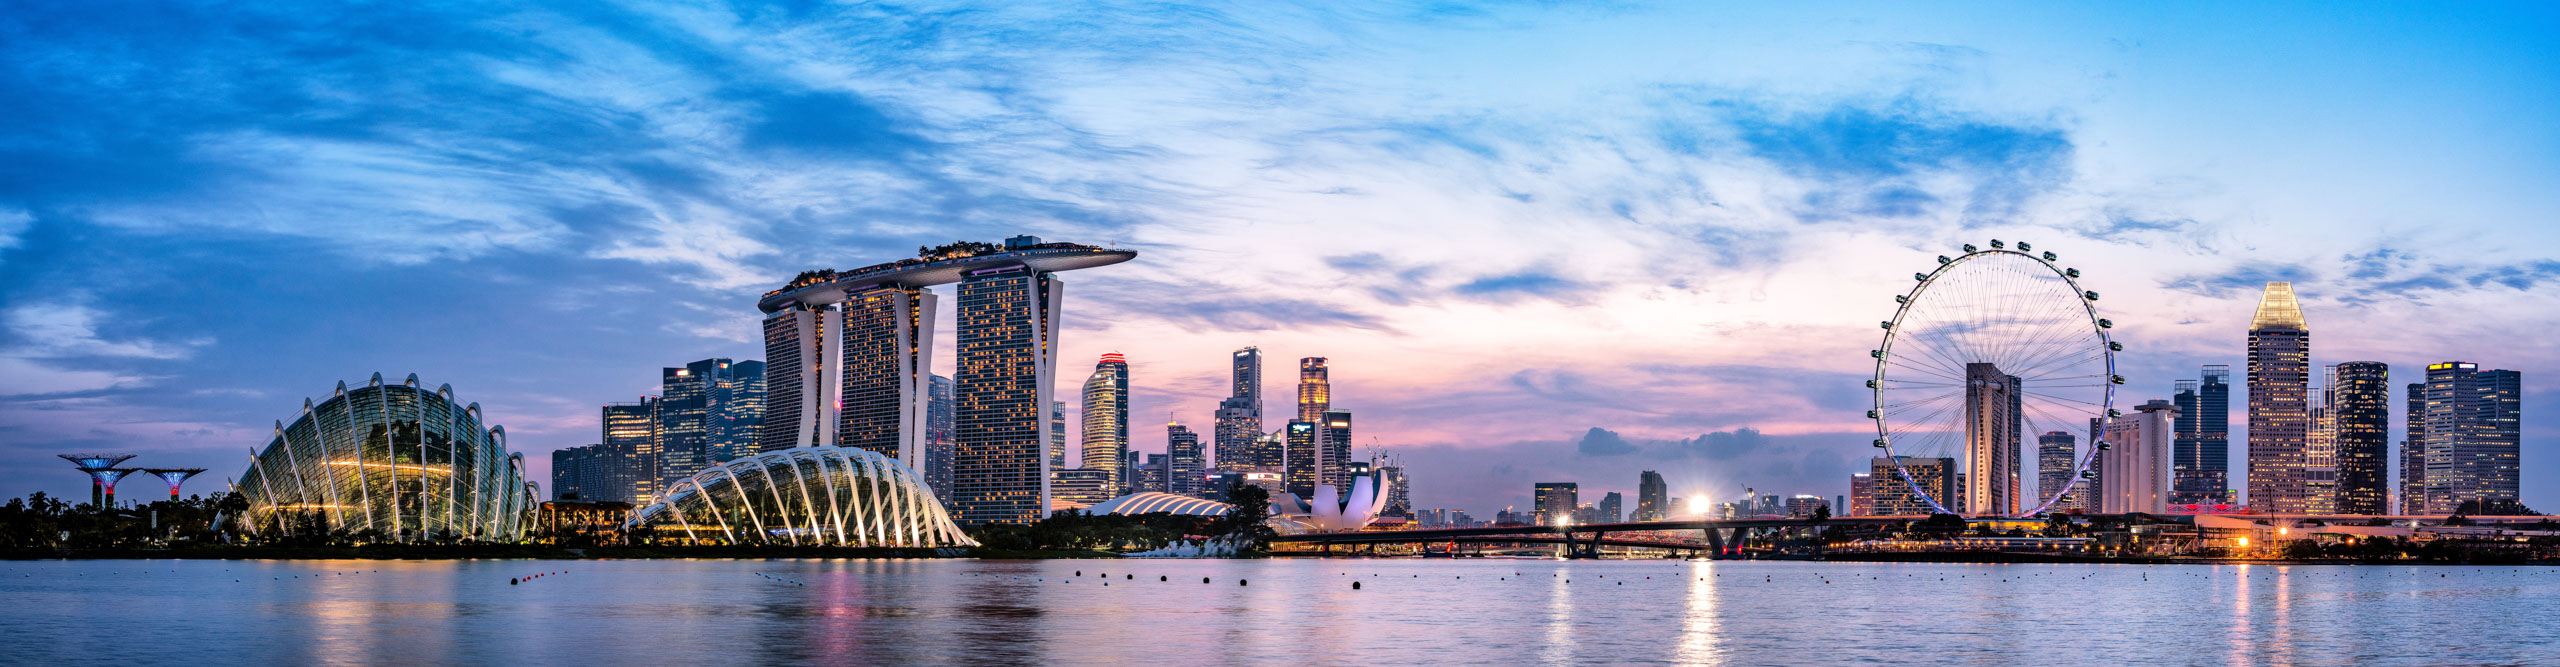 Singapore's skyline at dusk with a pink and blue sky 